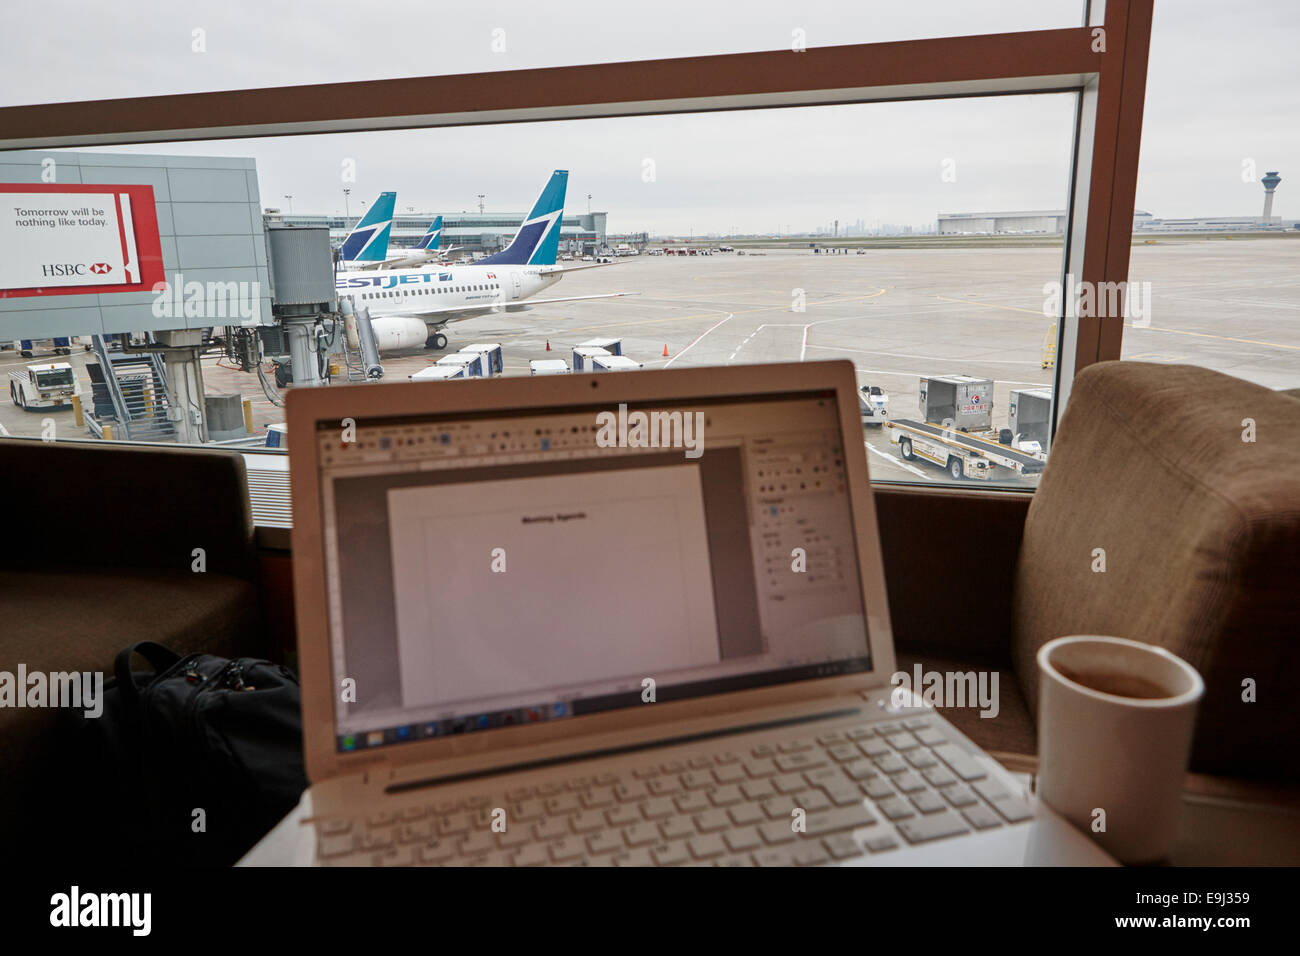 laptop with word document showing meeting agenda in airport business lounge in canada Stock Photo